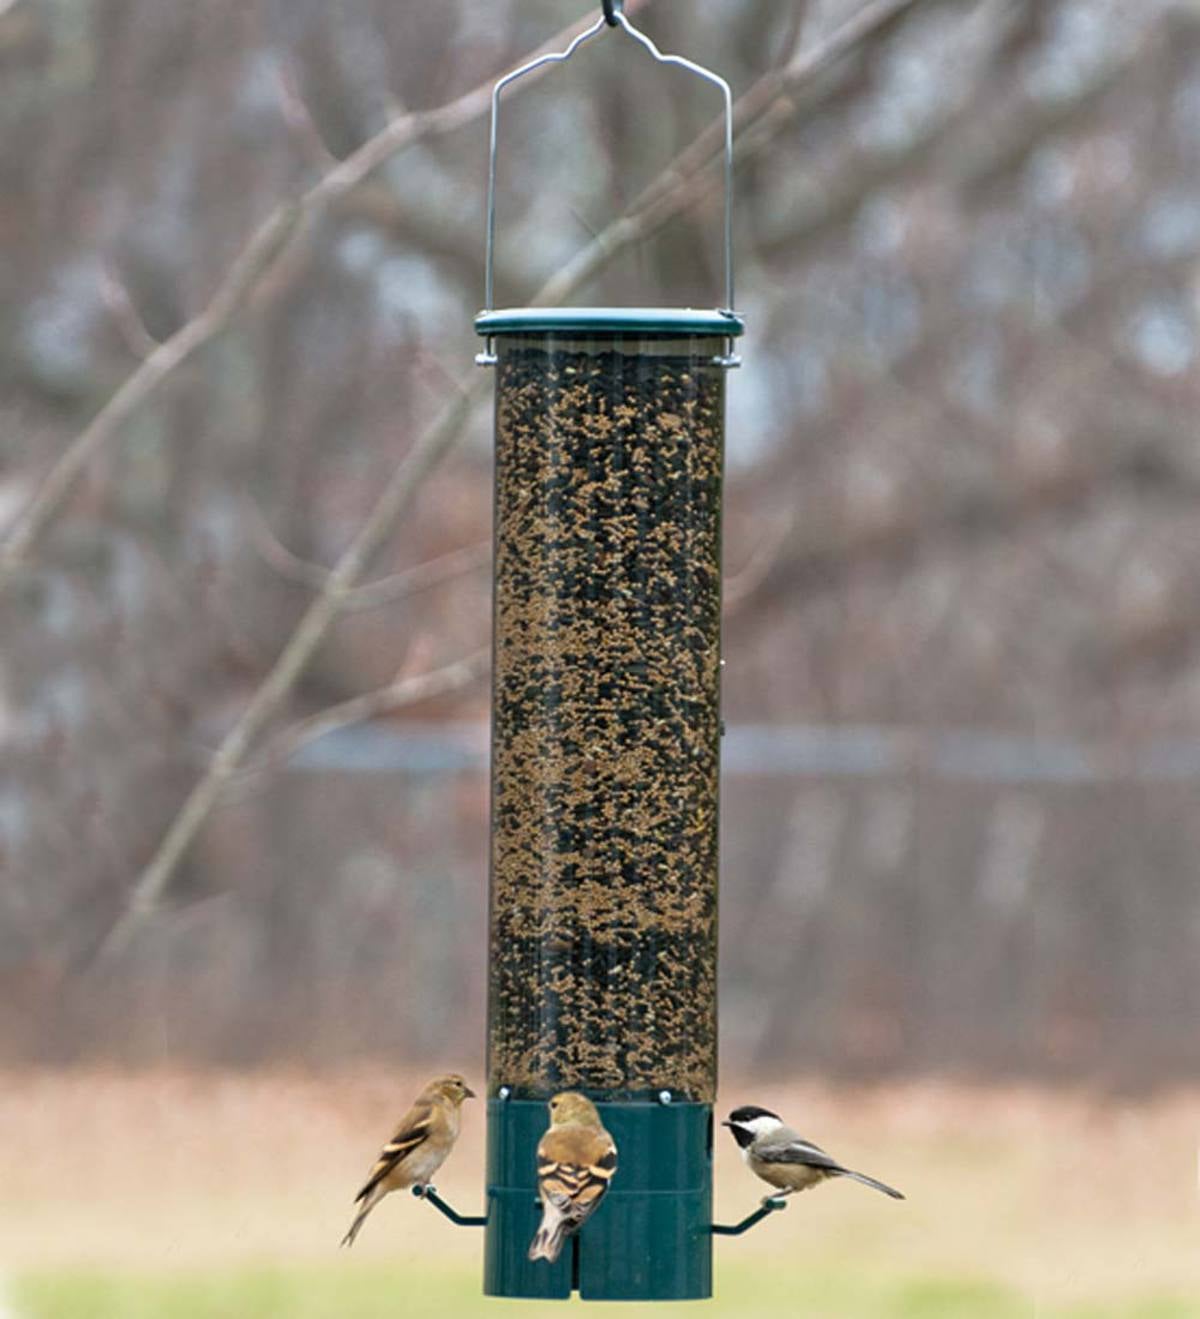 The Magnet Squirrel-Proof Feeder